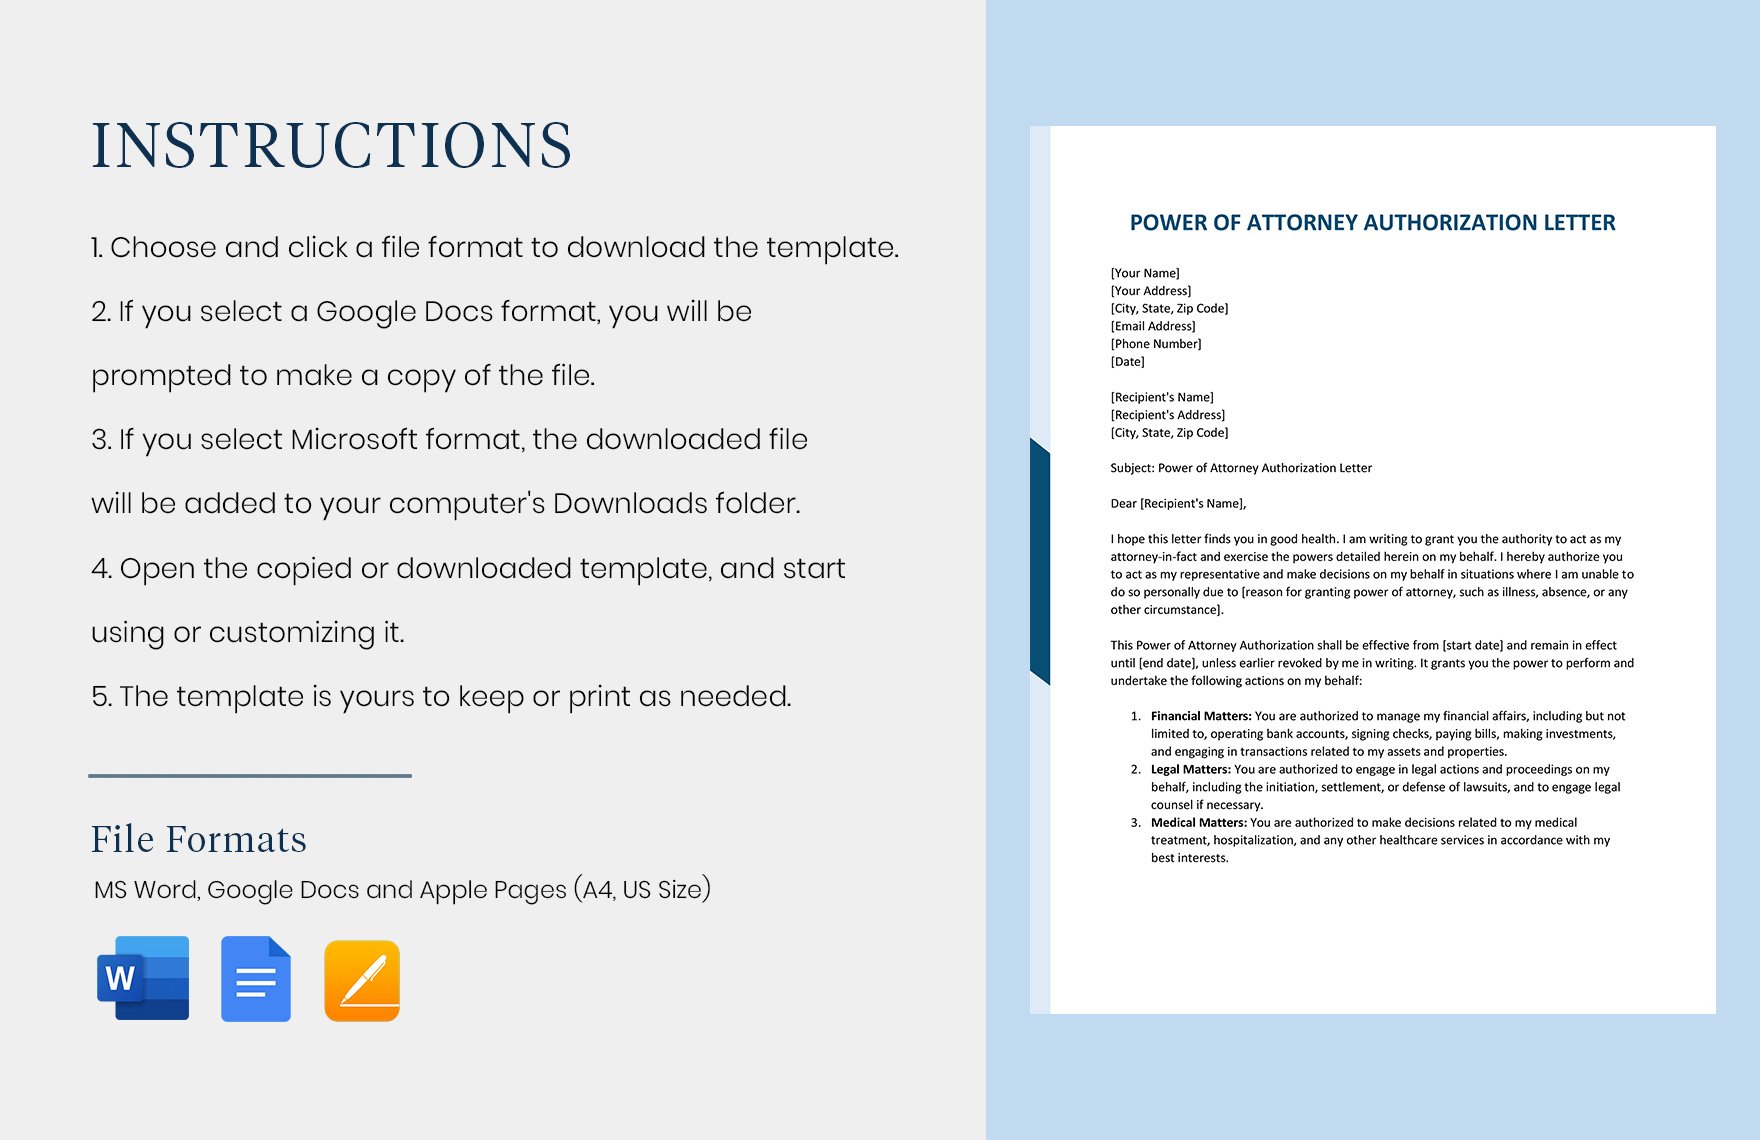 Power of Attorney Authorization Letter Template